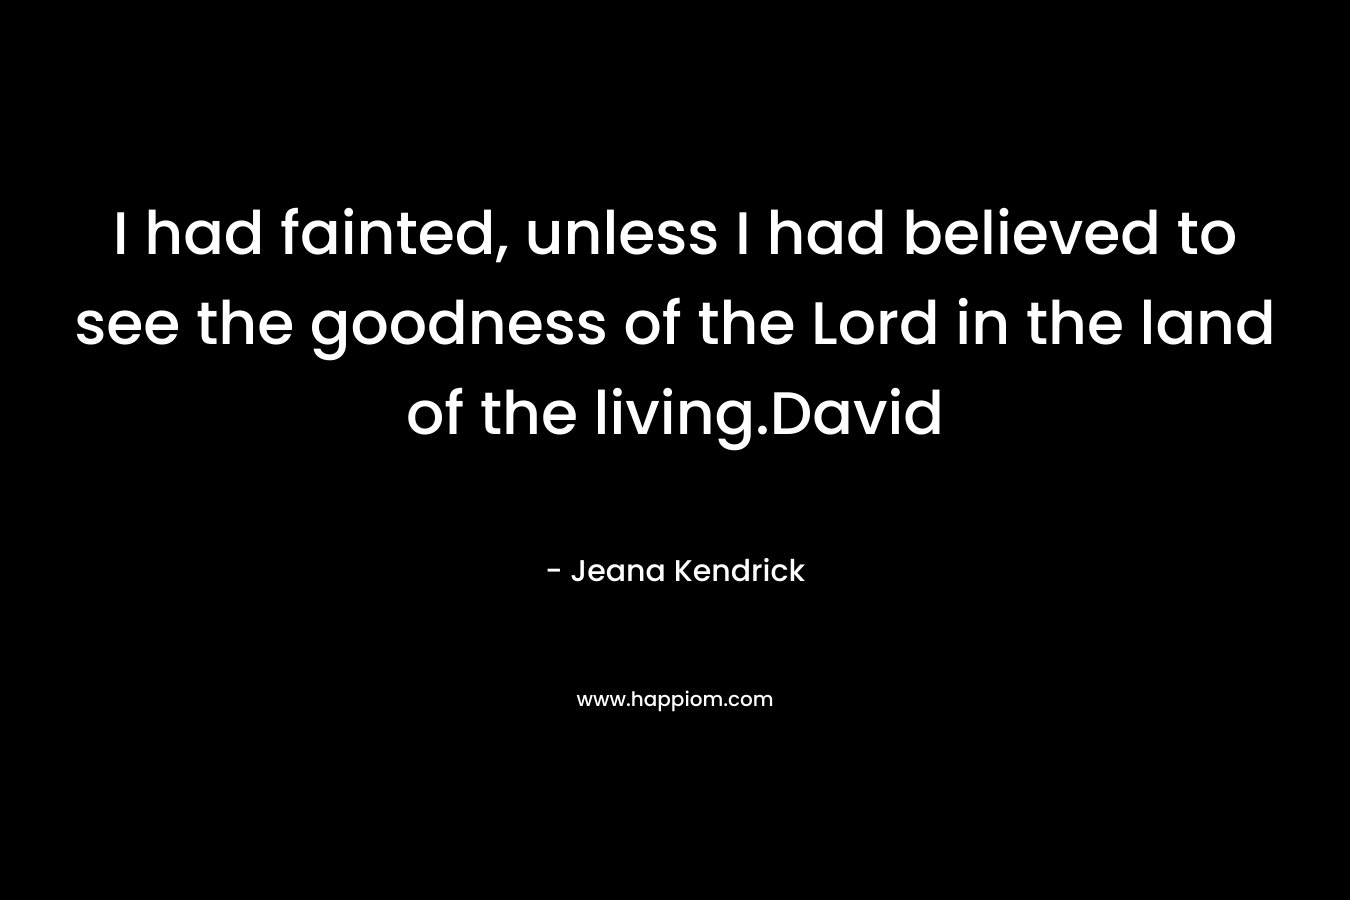 I had fainted, unless I had believed to see the goodness of the Lord in the land of the living.David – Jeana Kendrick